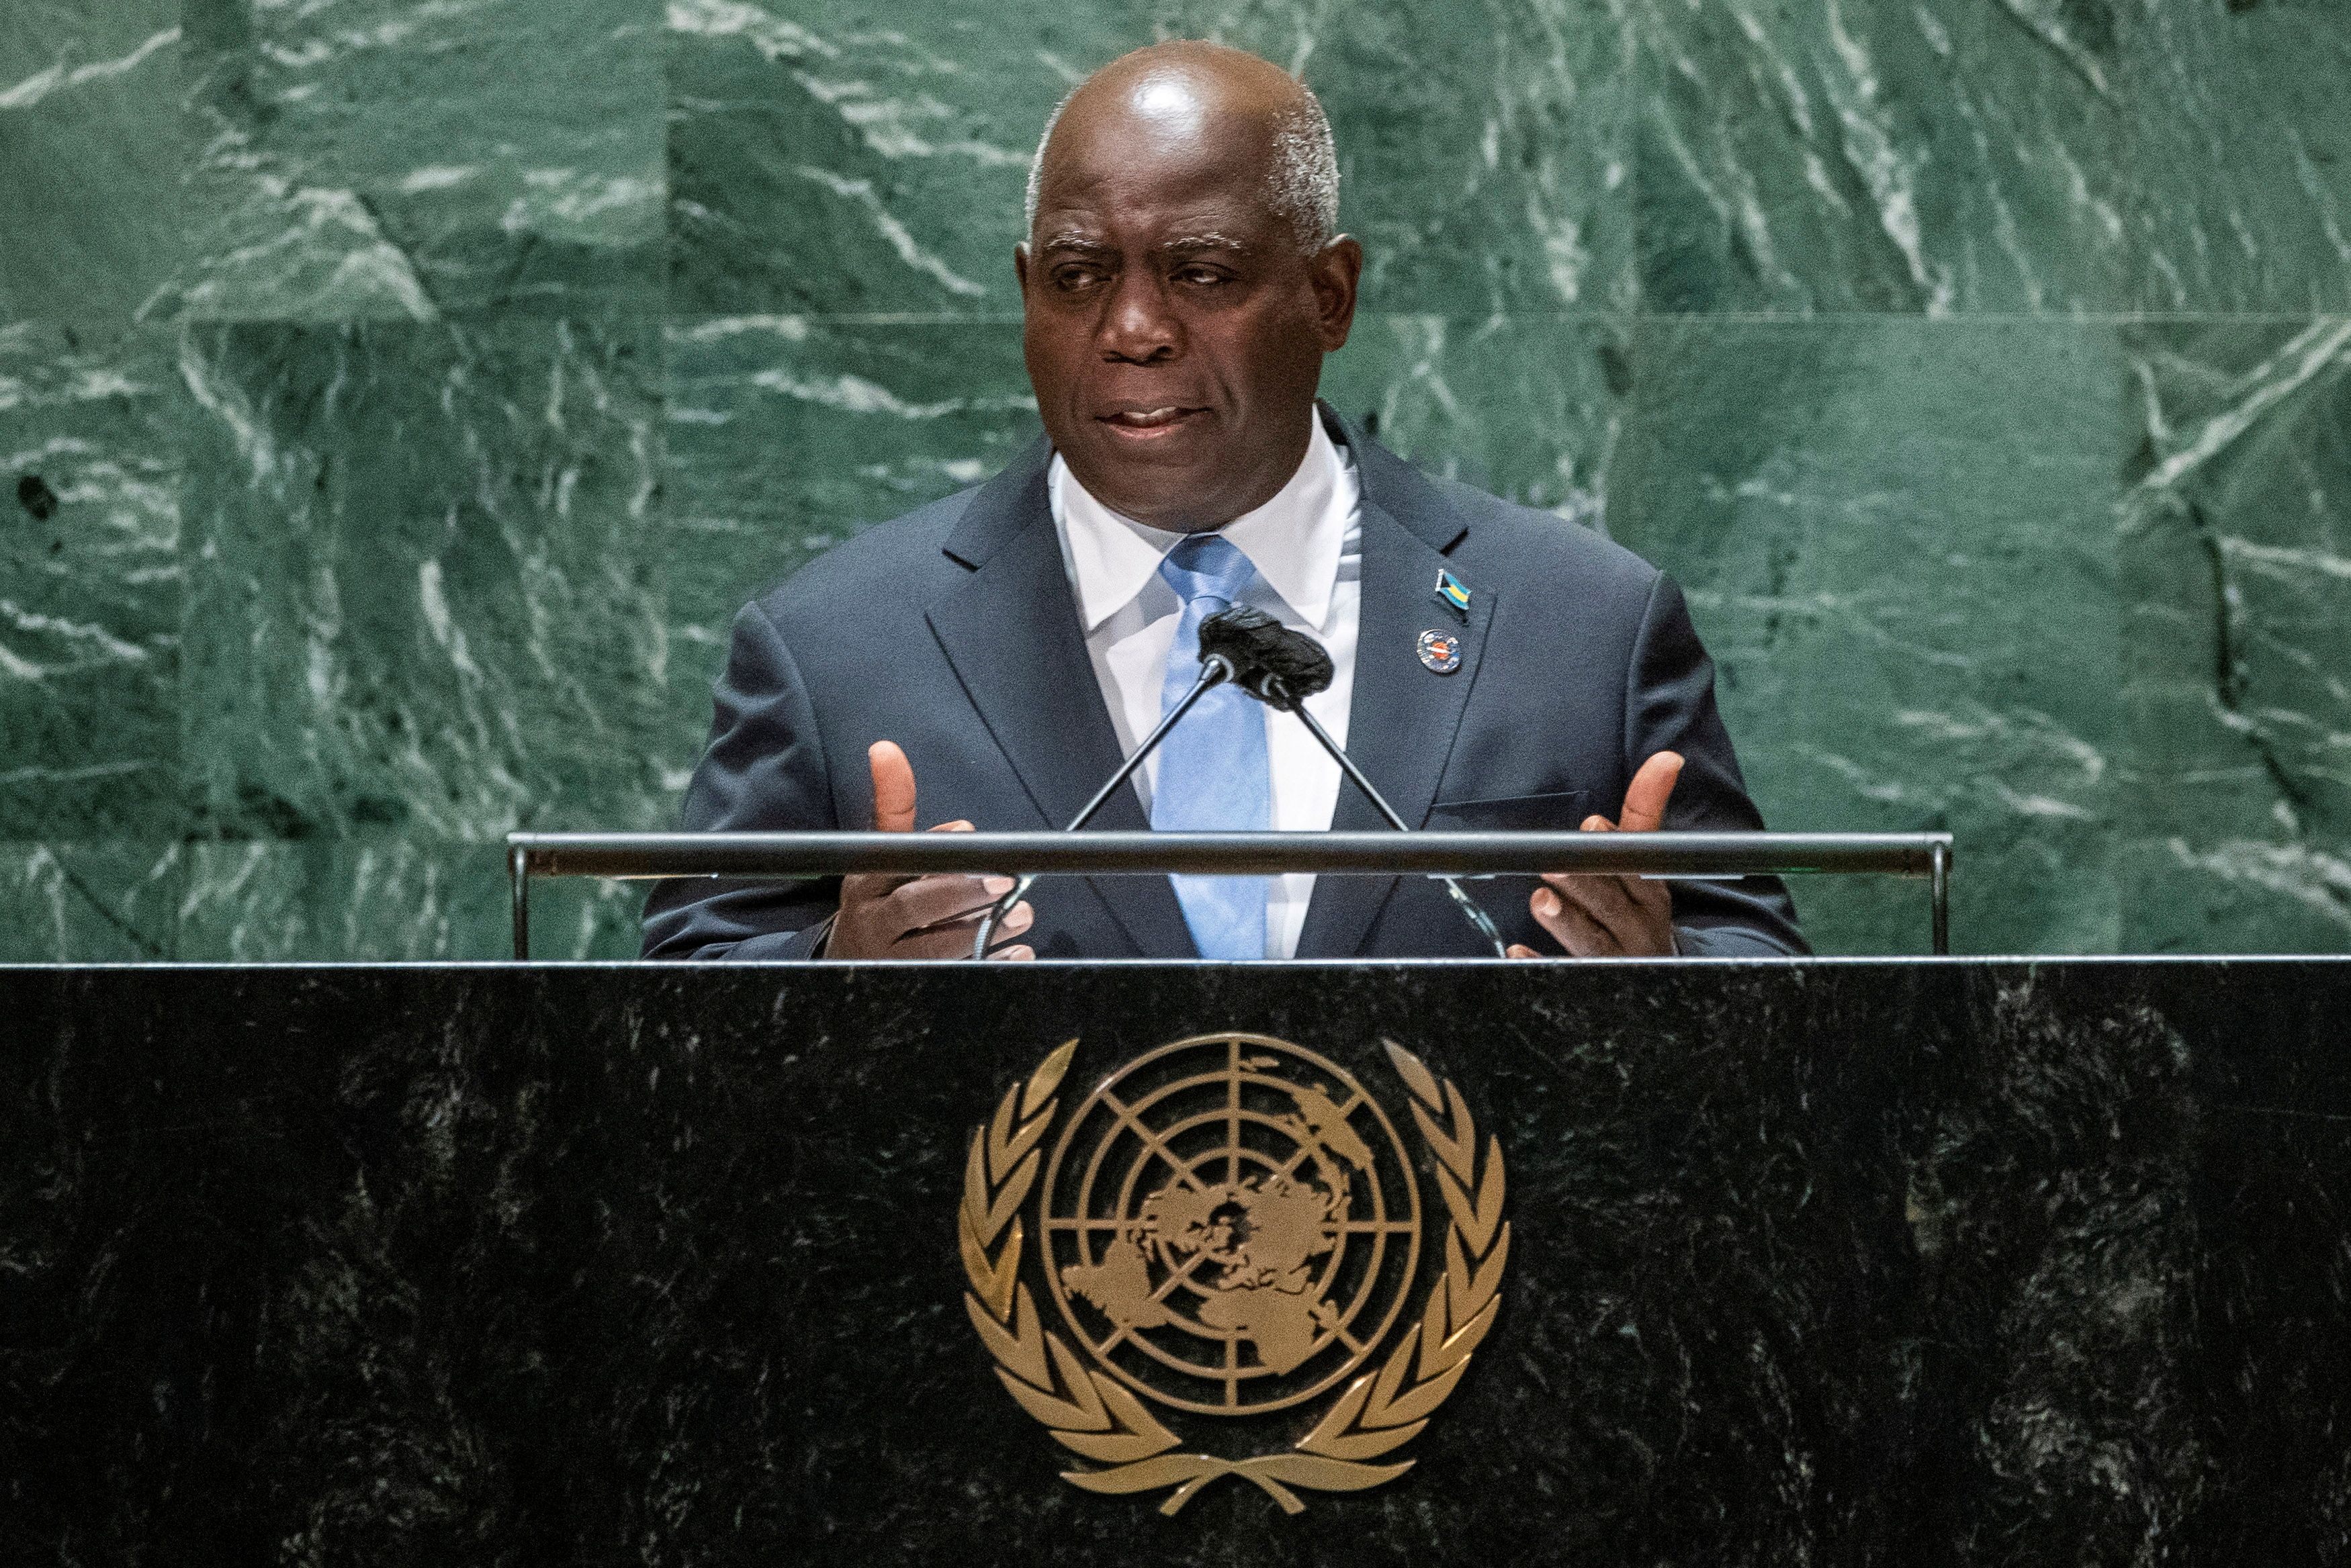 Bahamas’ Prime Minister Philip Edward Davis addresses the 76th Session of the U.N. General Assembly in New York City